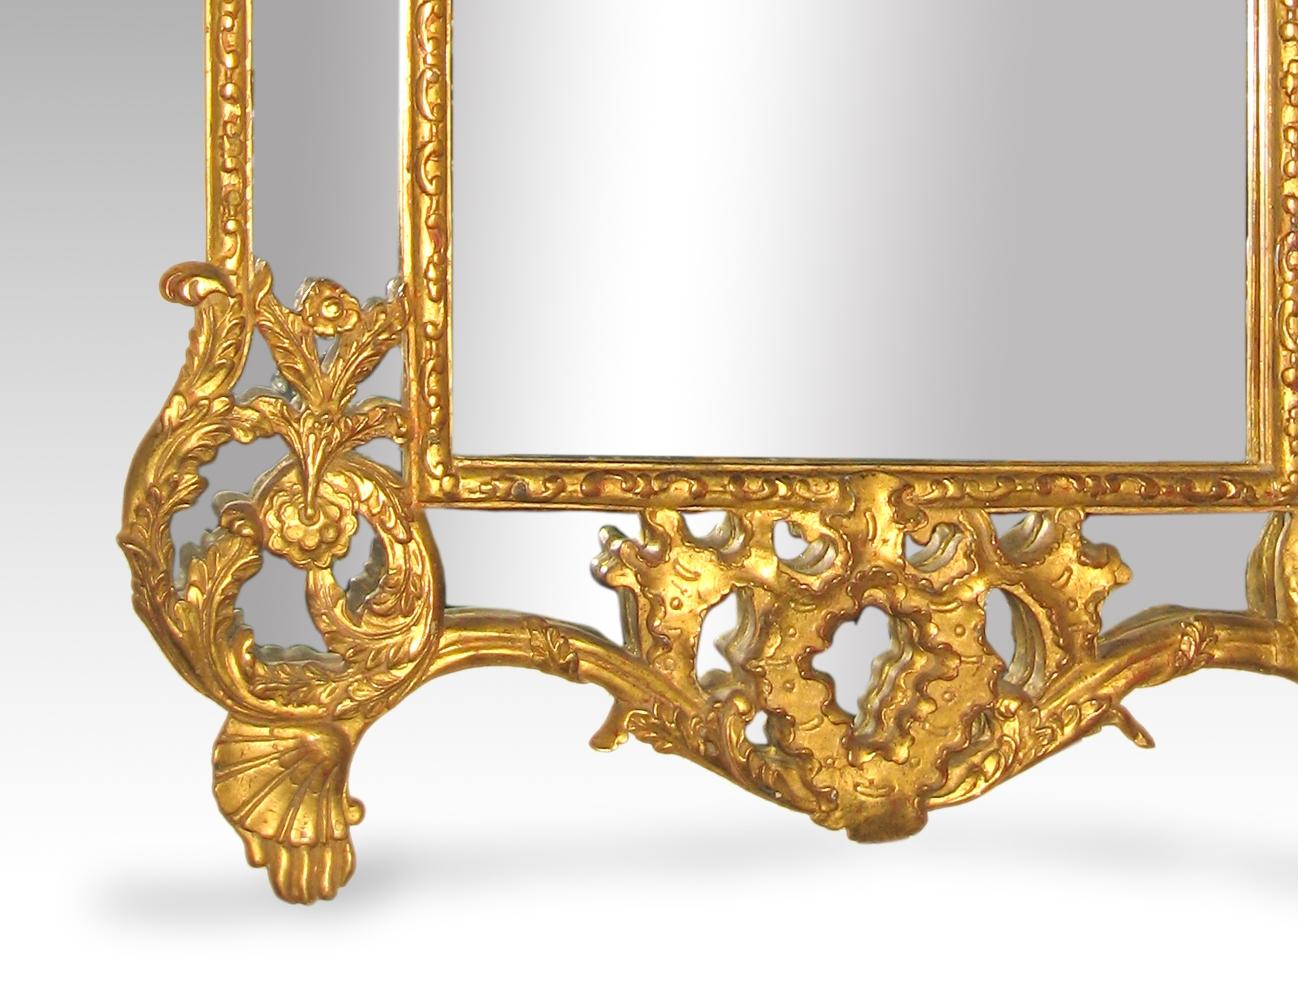 Rectangular mirror with wide frame, formed by wings, crest and lower back with decorative motifs inspired by the classic tradition (scrolls, vases, garlands, etc.). It is inspired by the well-known and appreciated cornucopias already used in the